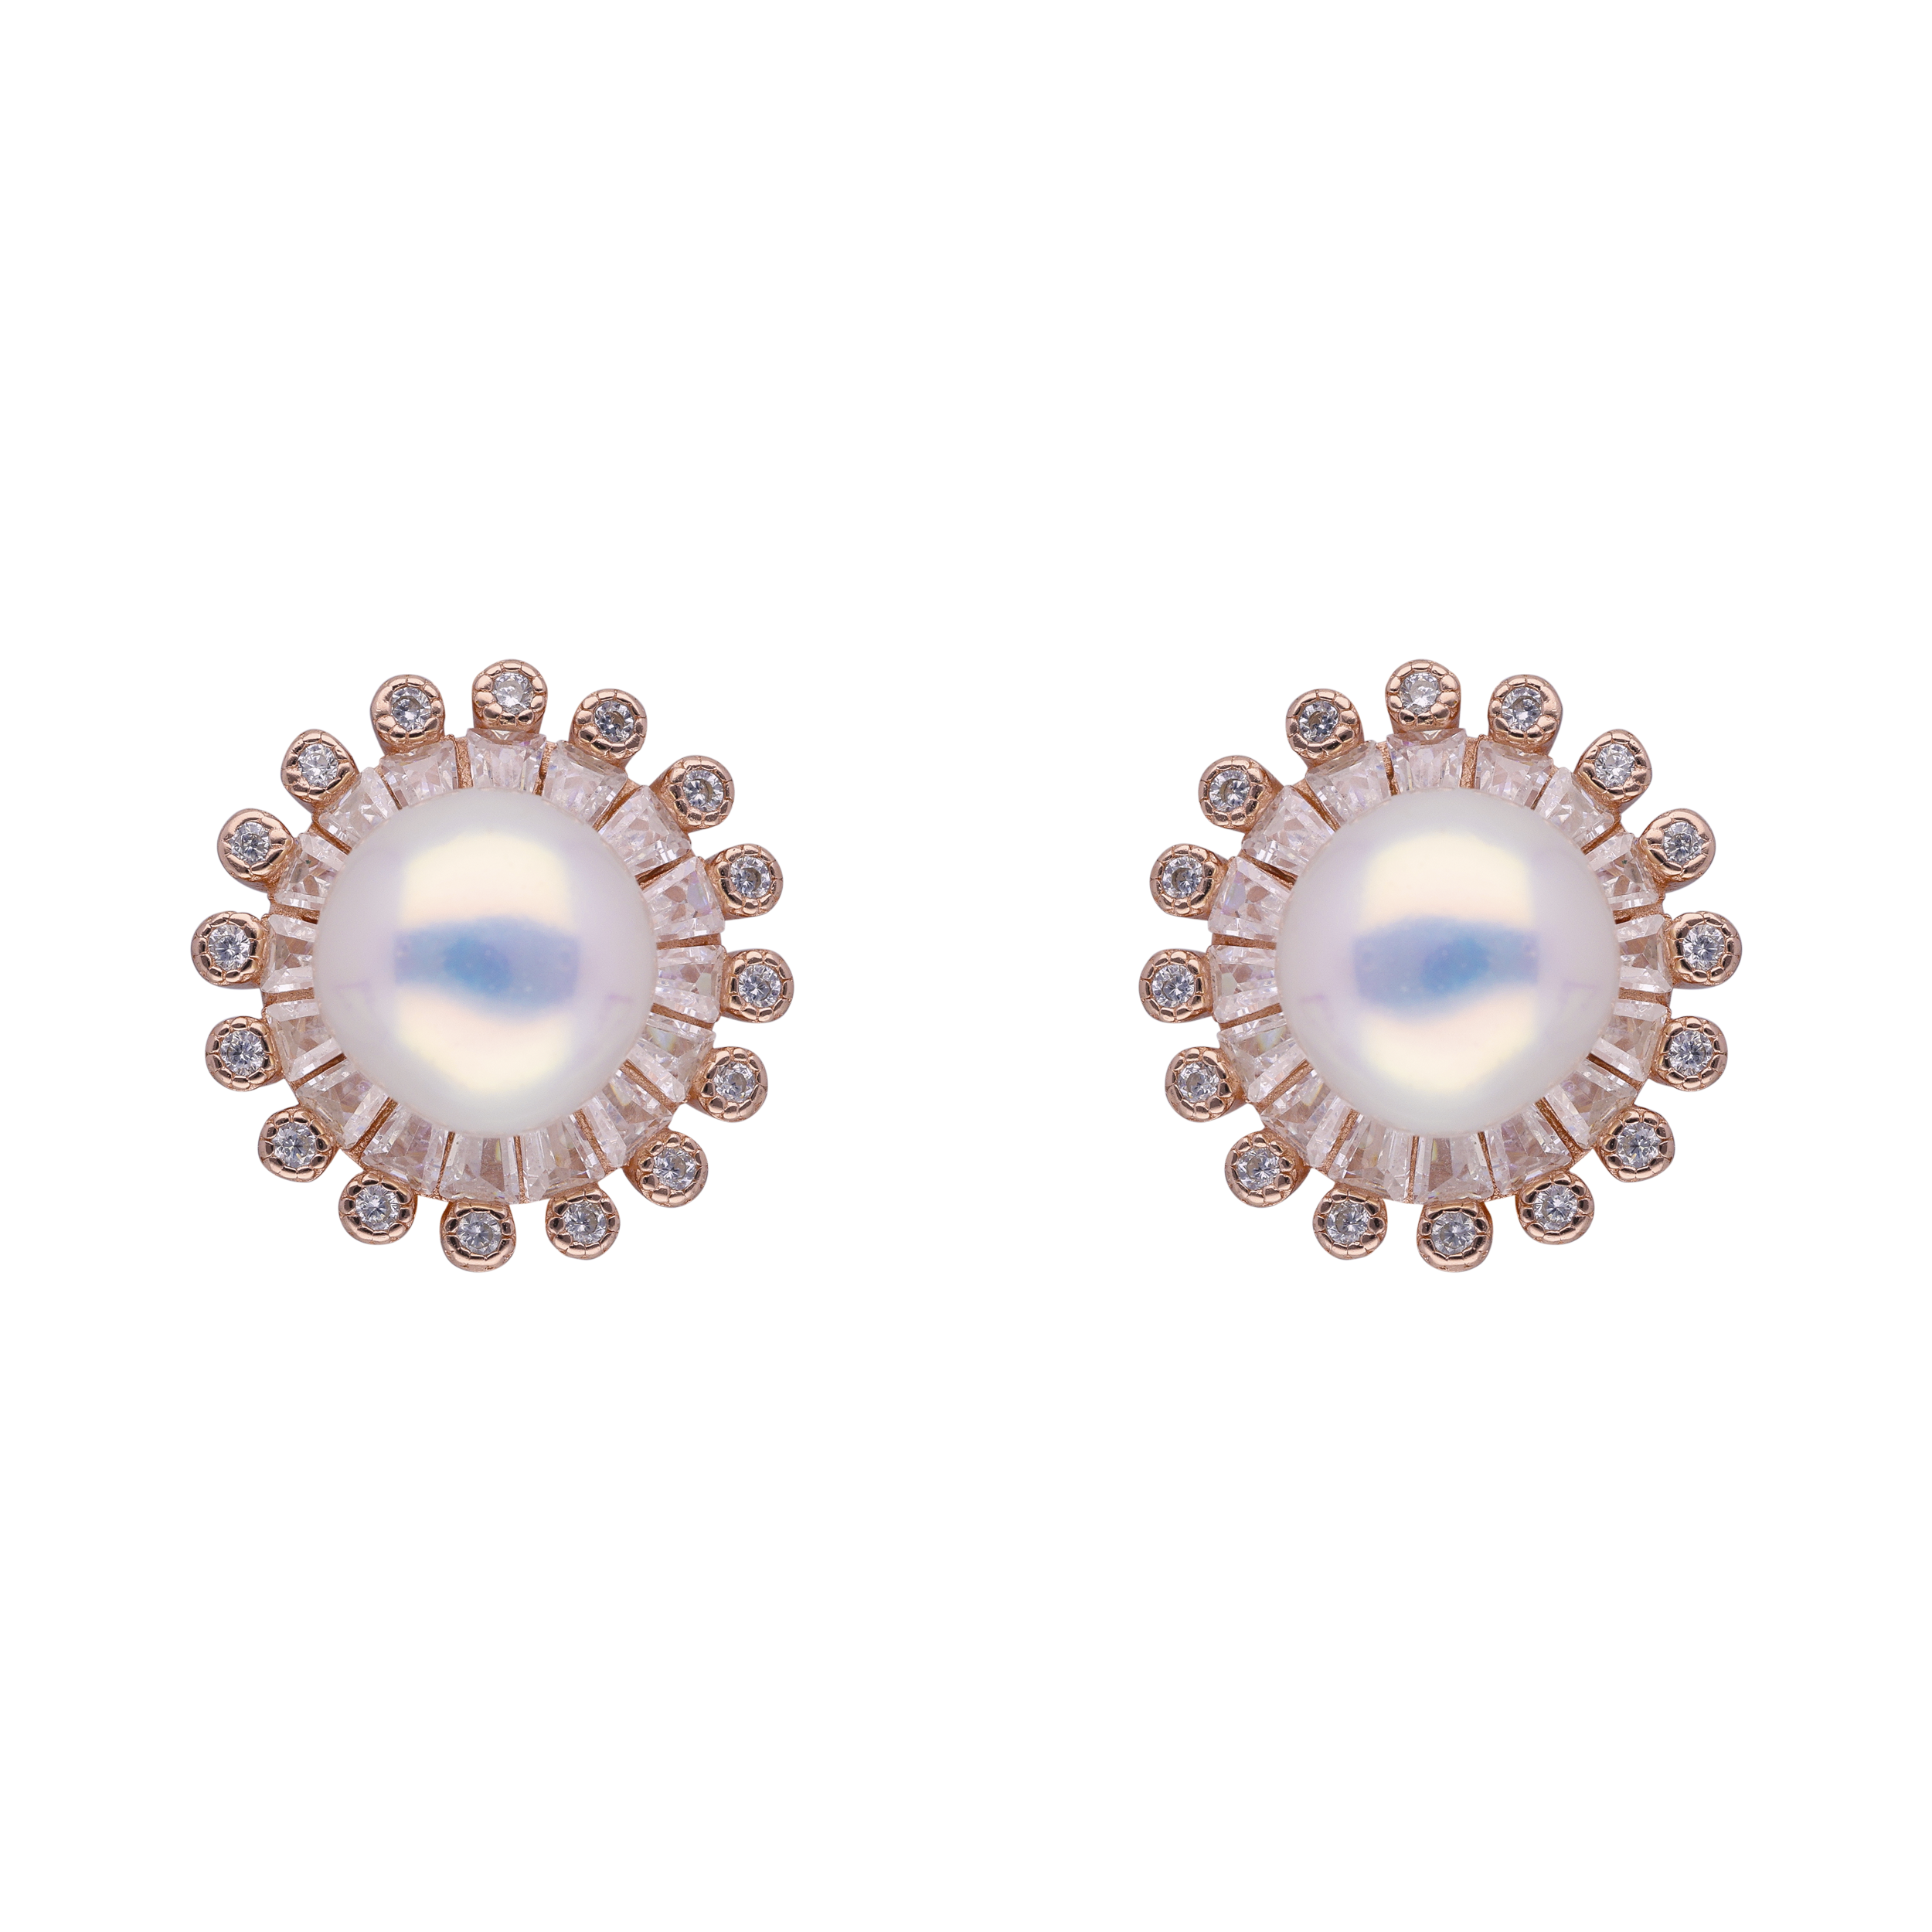 Pearl Radiance: Sterling Silver Earstuds with Cubic Zirconia and Pearl Accents | SKU : 0019891910, 0003109526, 0019891934, 0003109489